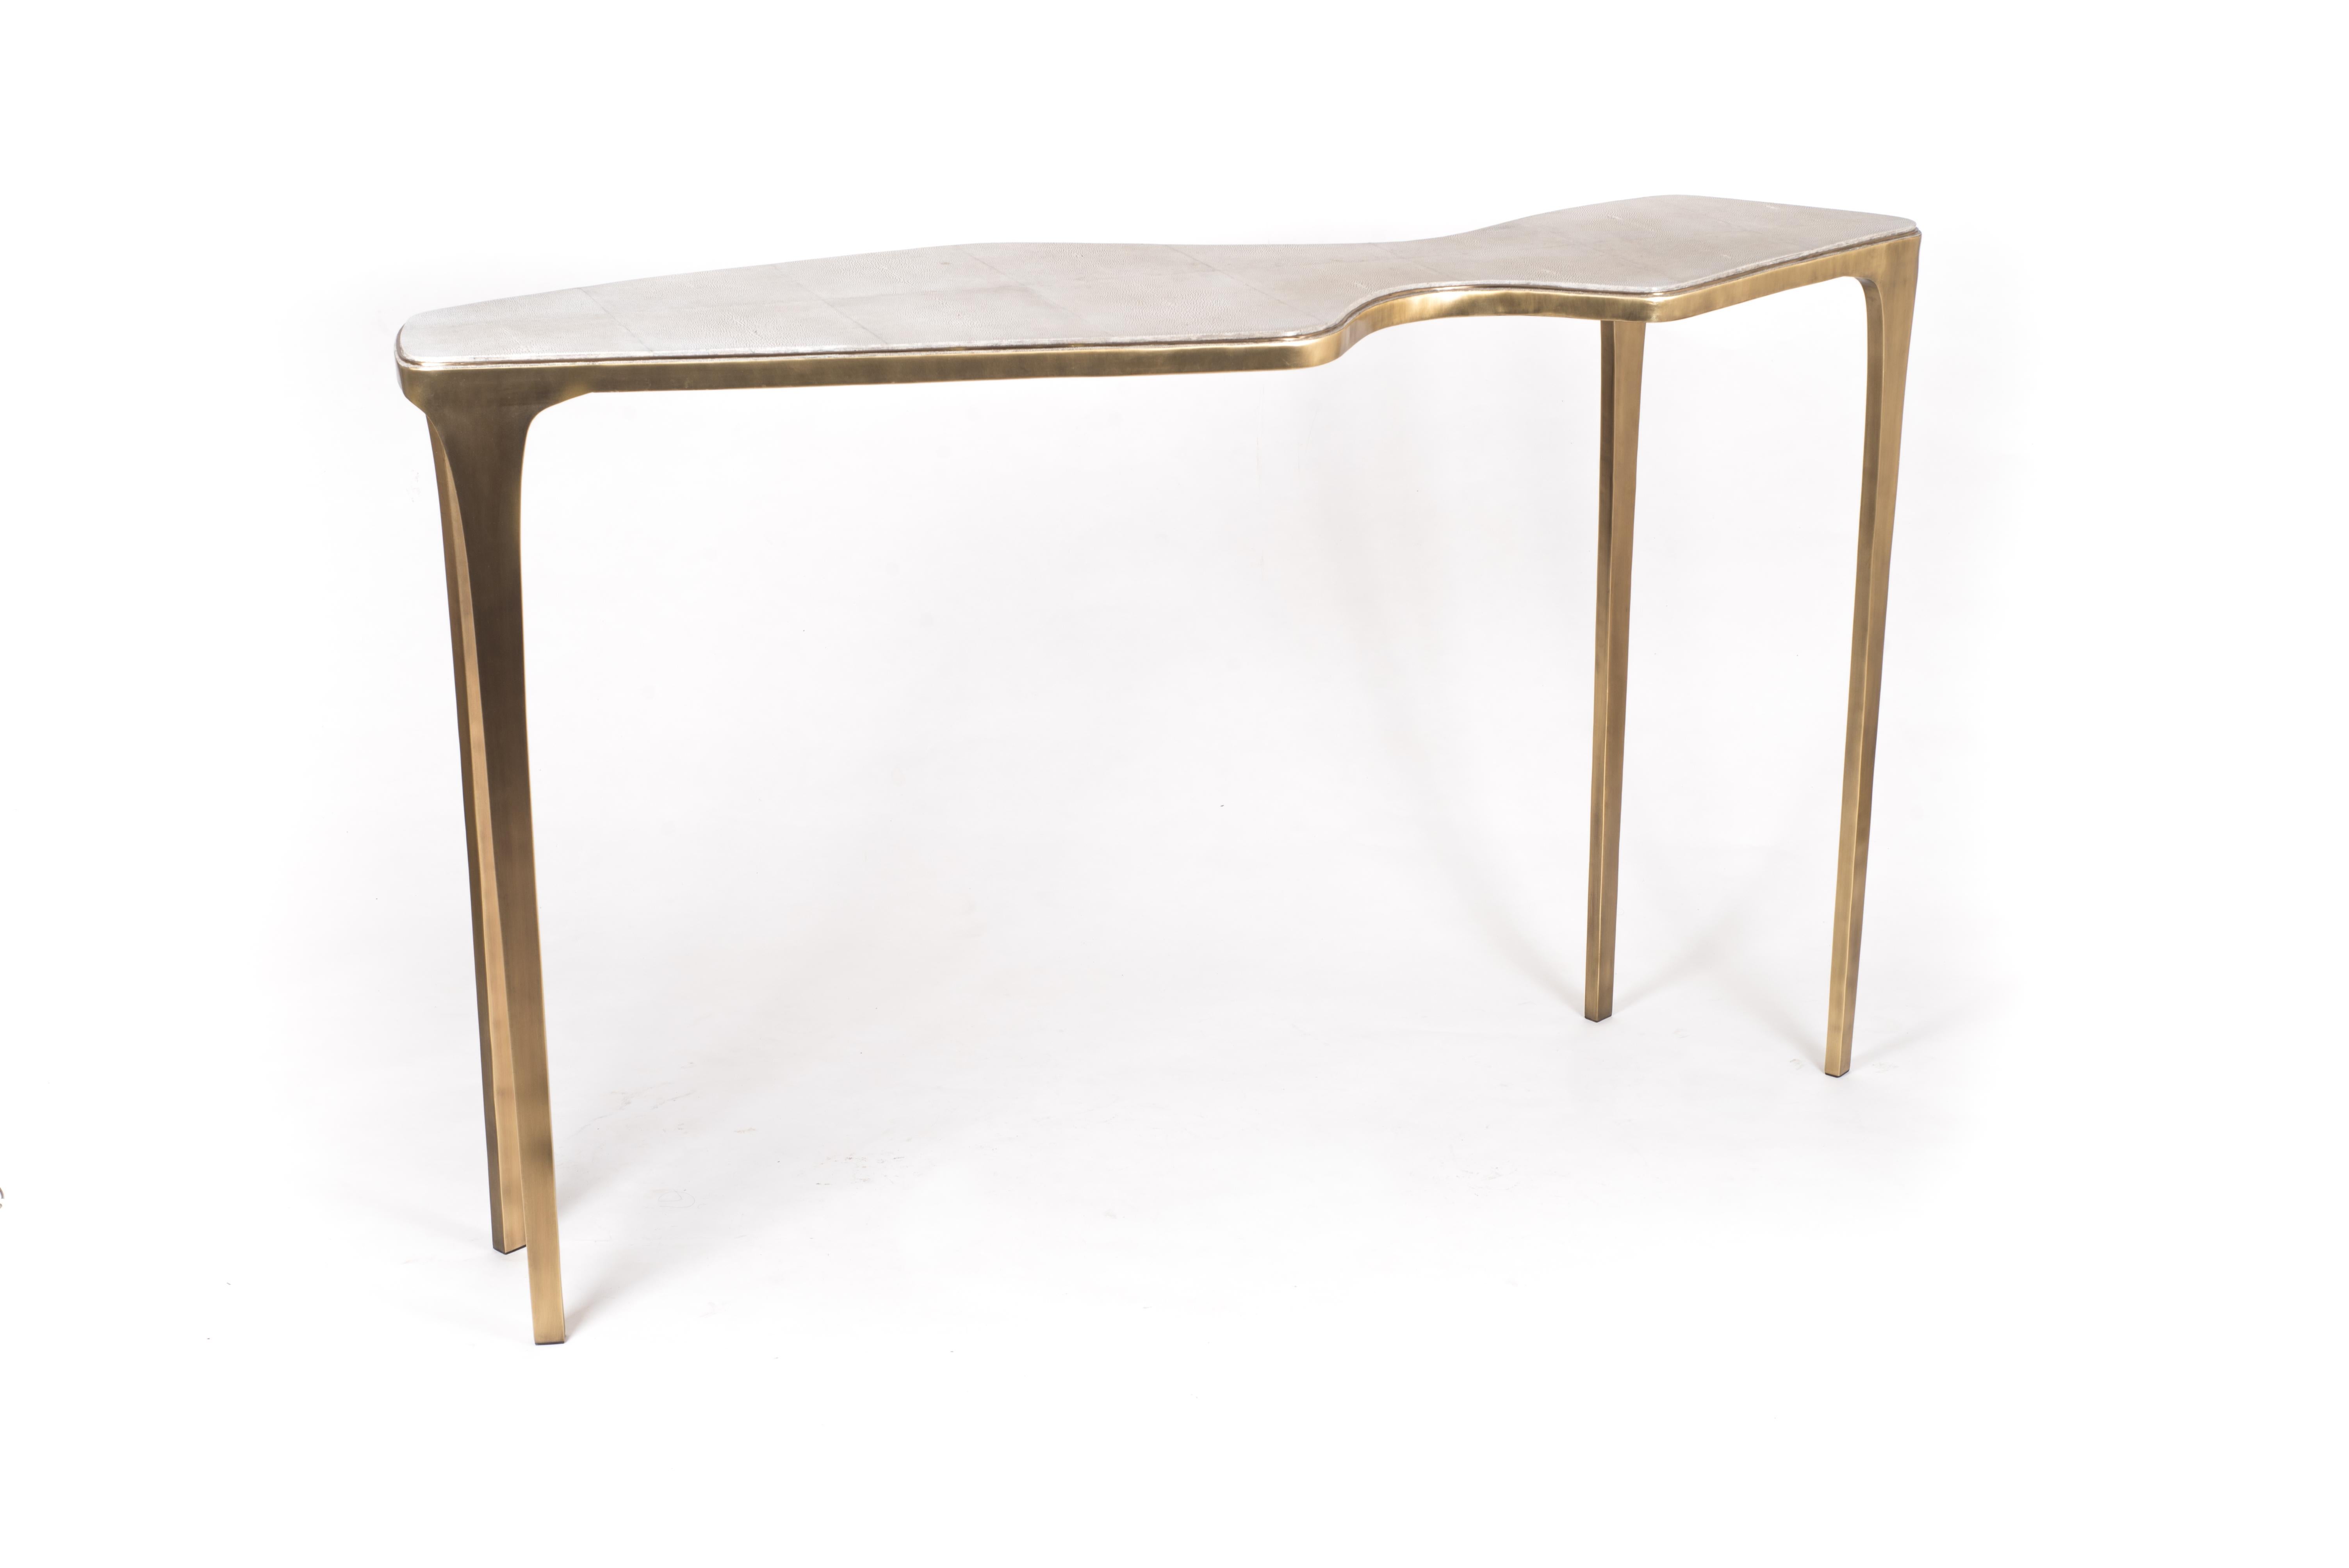 The cosmos console table’s simple but elegant design, makes for an adaptable neutral piece of furniture. The cream shagreen cosmic-inspired shaped top sits on bronze-patina brass legs. Custom color or sizing available on request. A set of coffee